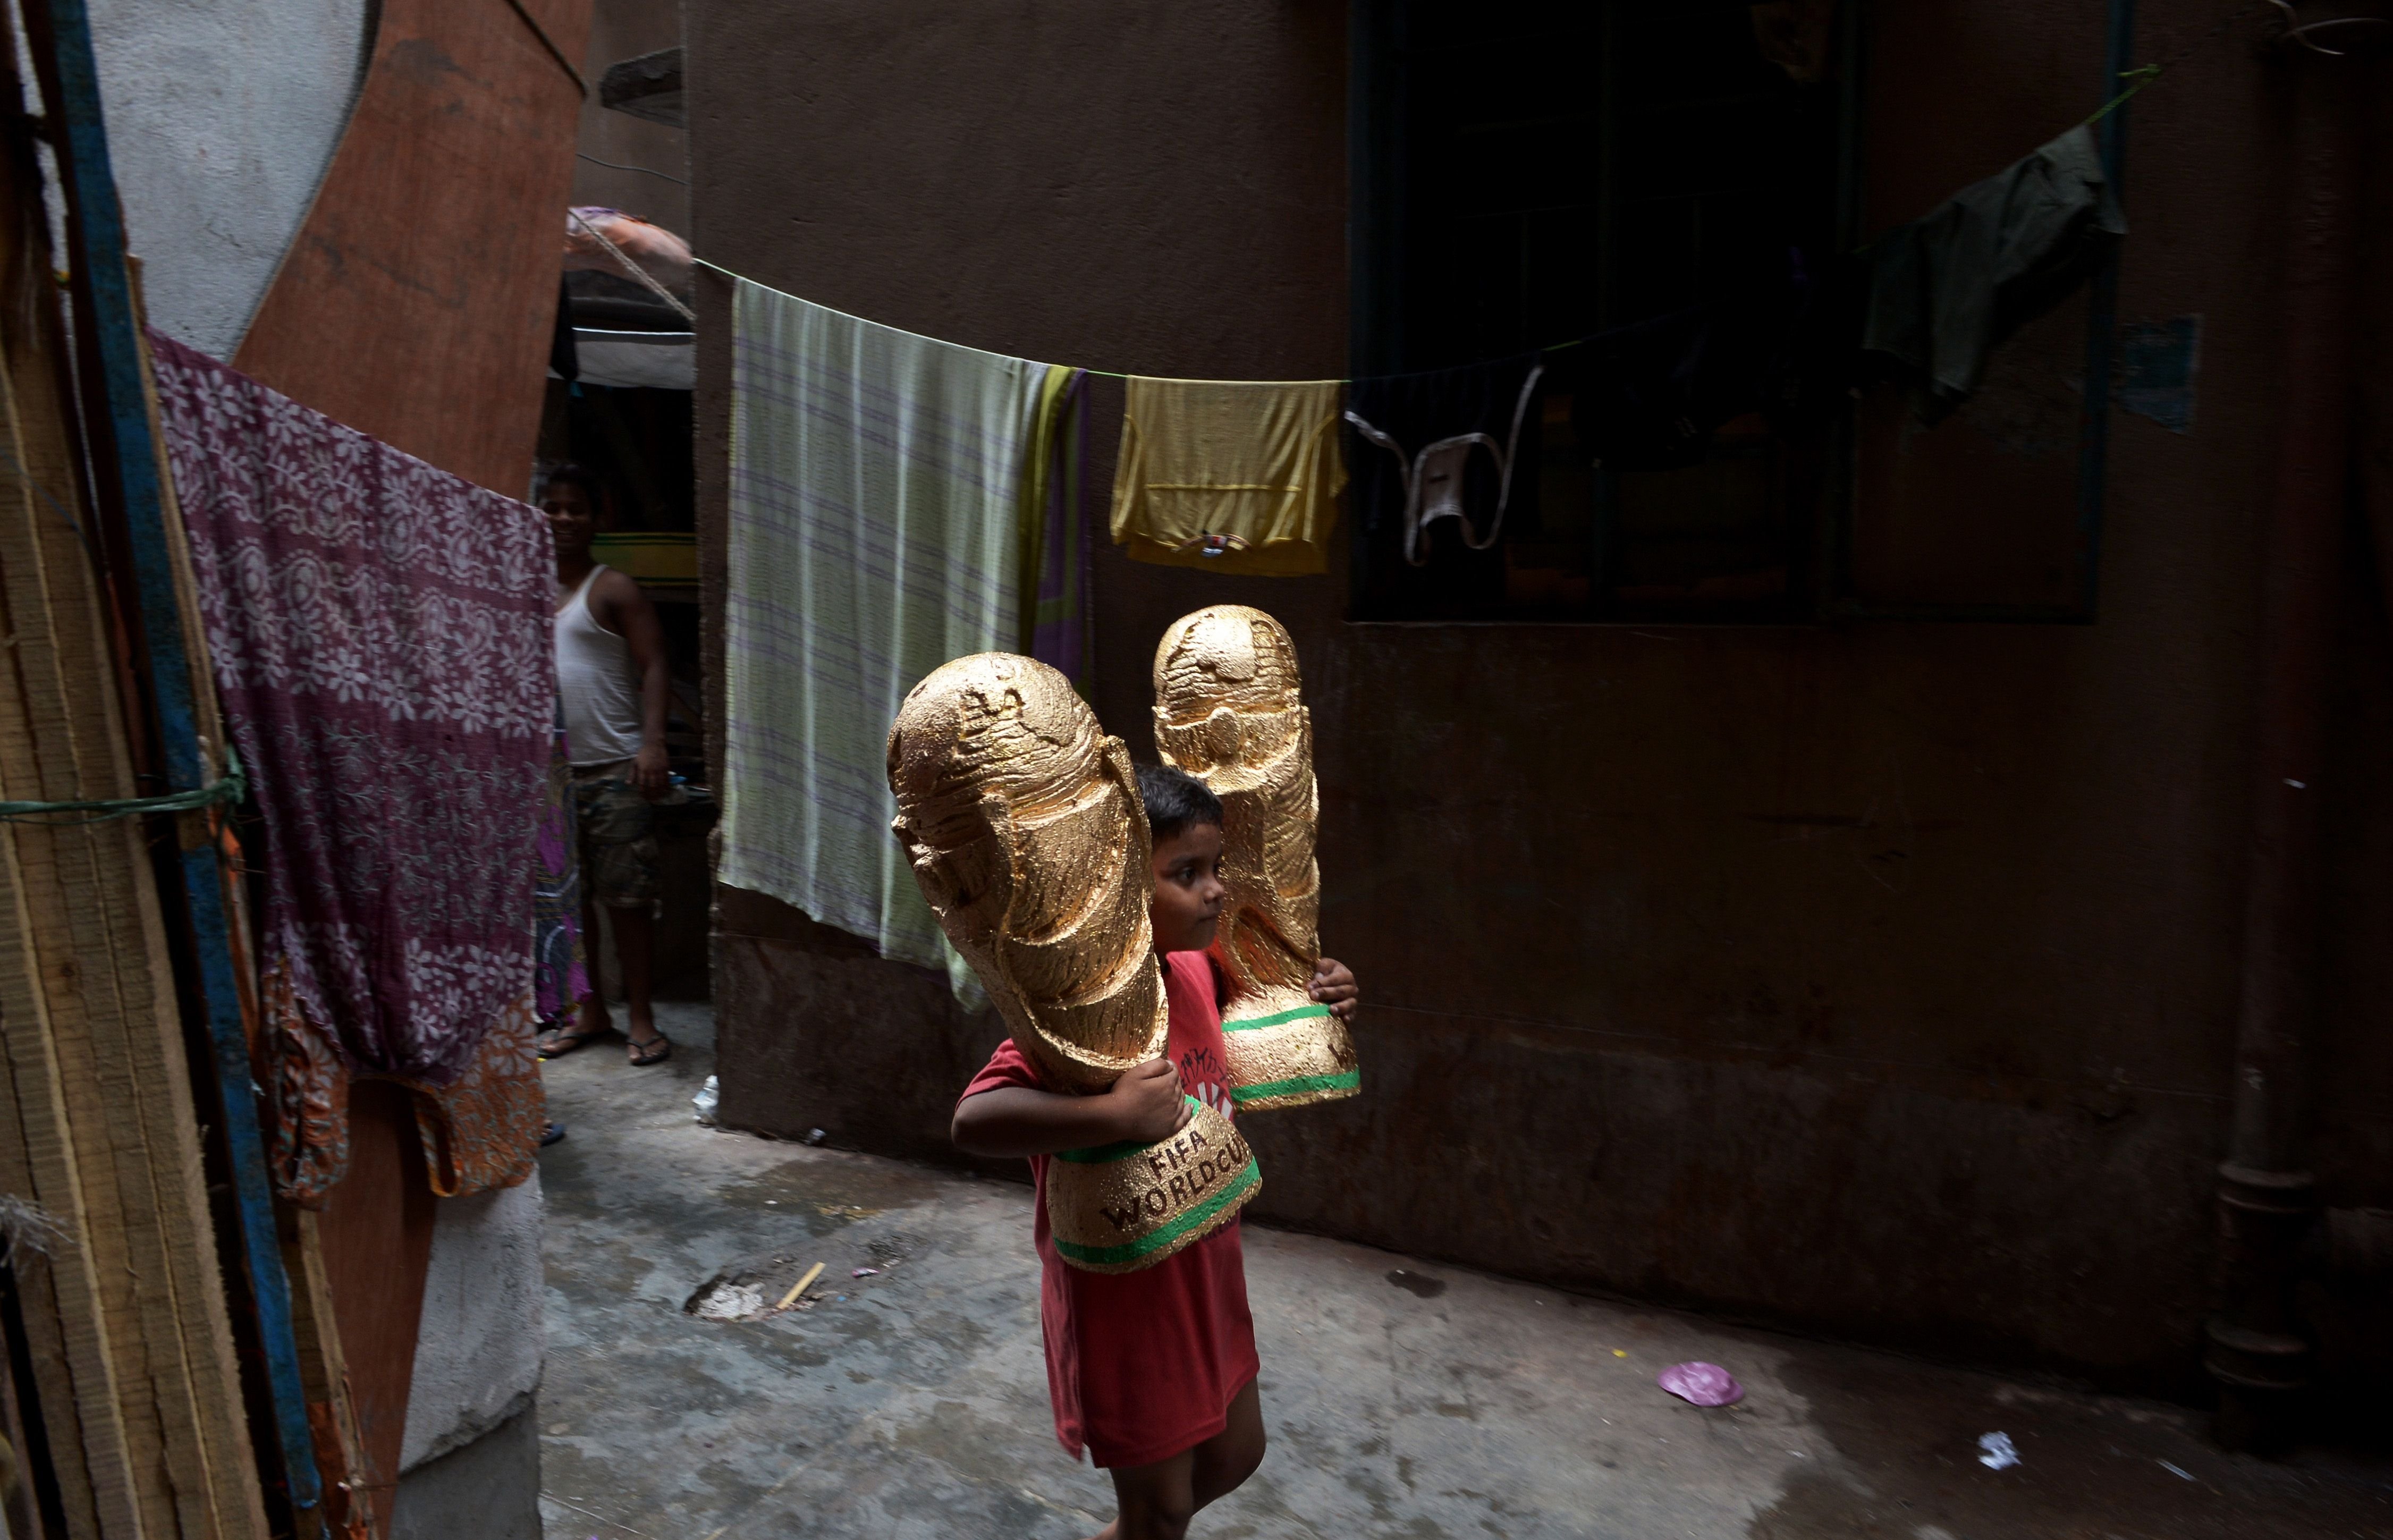 A young Indian boy carries a pair of models of the 2014 FIFA World Cup trophy made by artisans to a godown - warehouse in Kolkata, India on June 18, 2014.